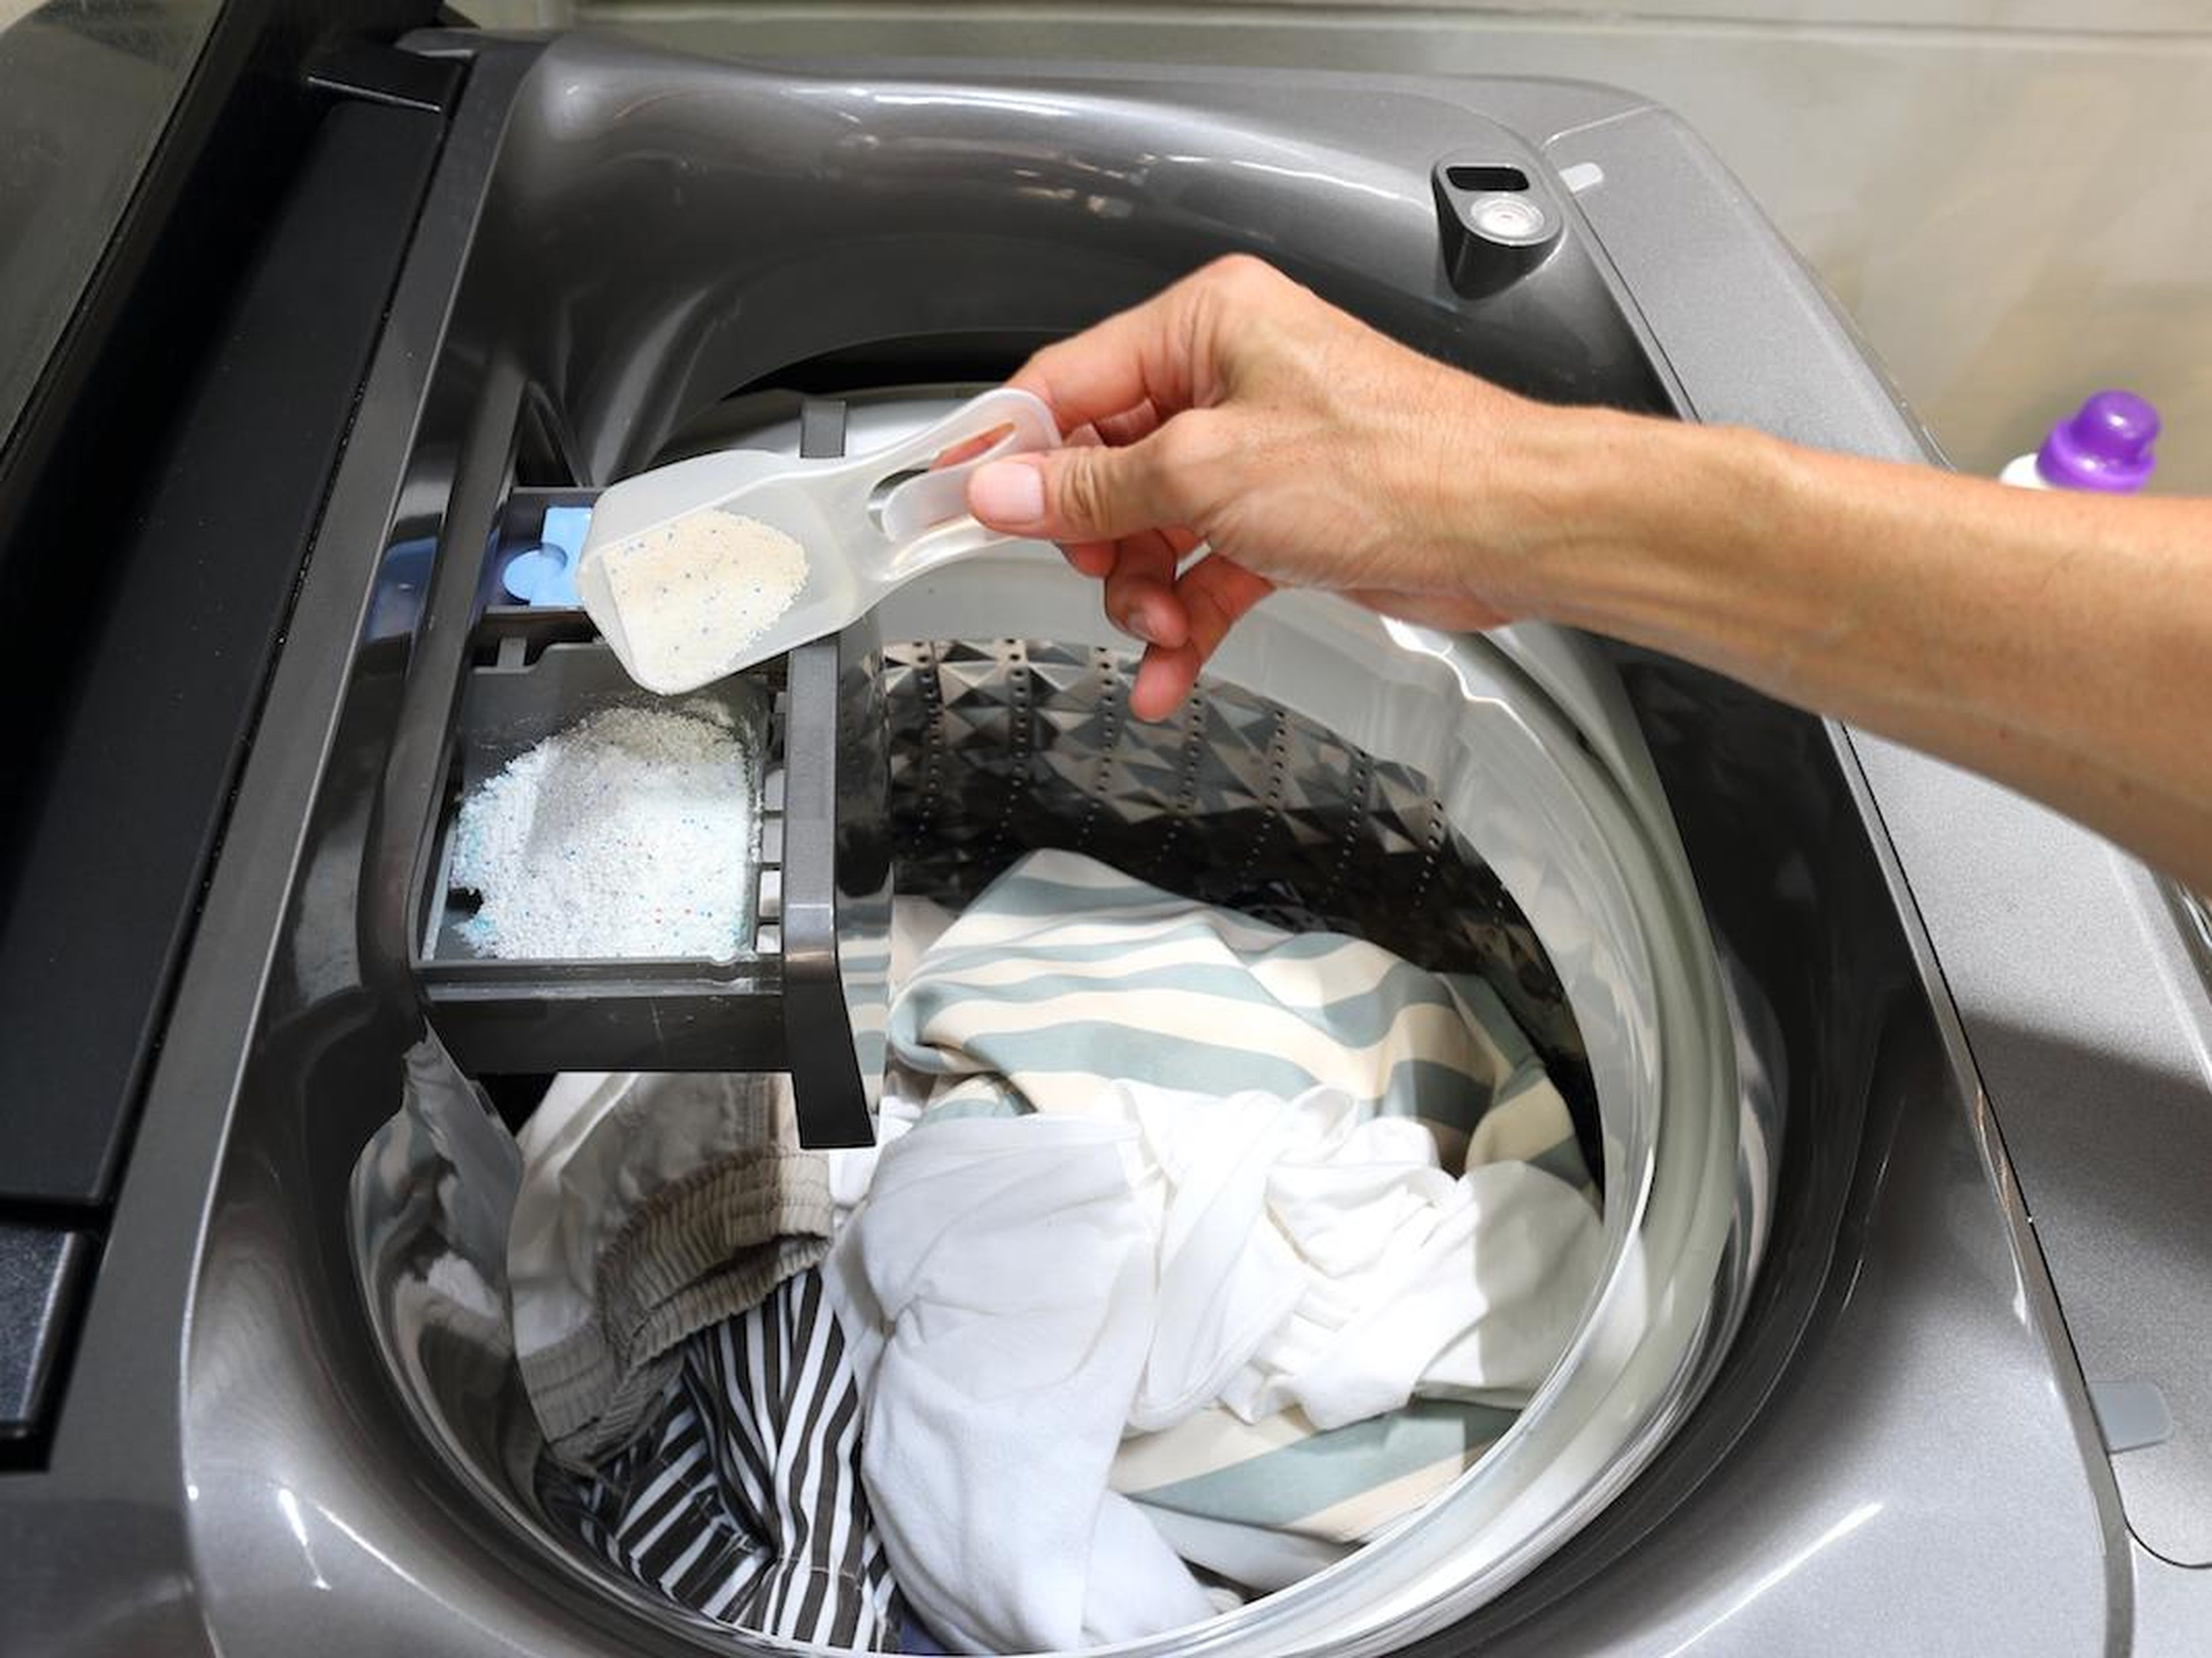 Doing less than a full load of laundry wastes water and energy.